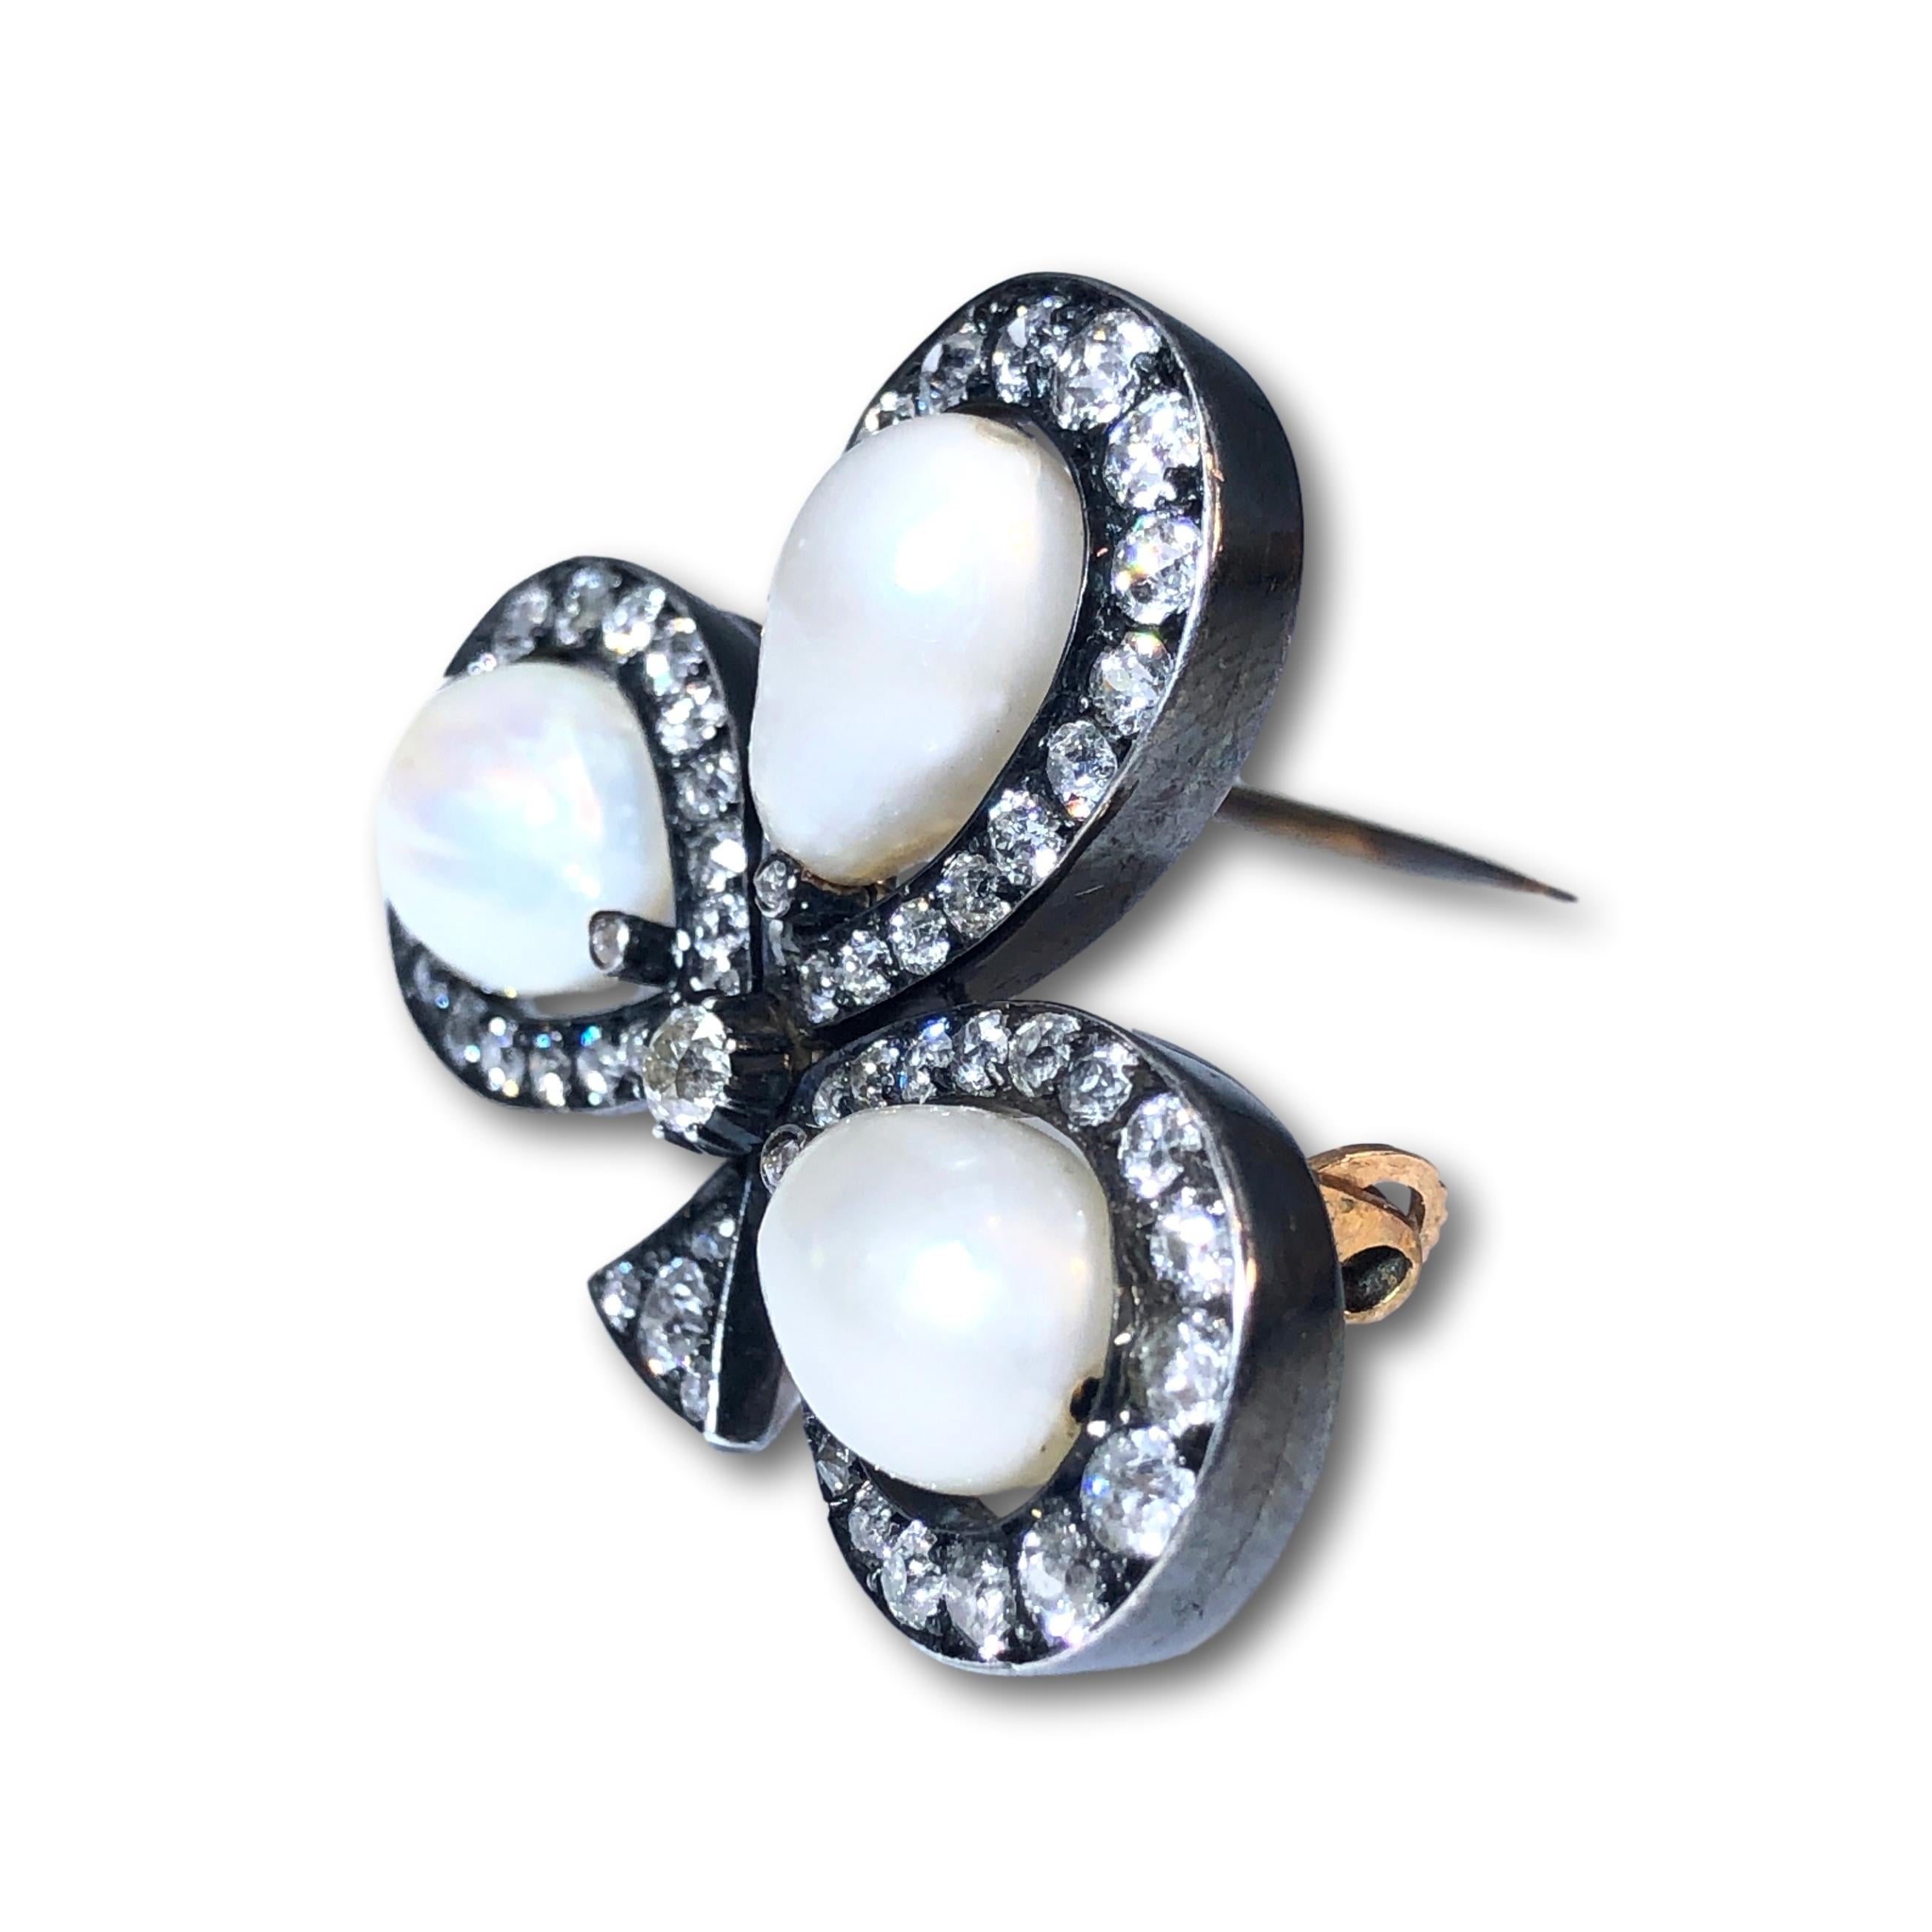 This Brooch features natural drop-shaped pearls, measuring 7.62 x 7.13mm to 7.91 x 7.50mm
Old European-cut diamonds, and is silver topped gold, with a length approximately 1.50 inches

GIA Report: Natural pearls, saltwater, no indications of